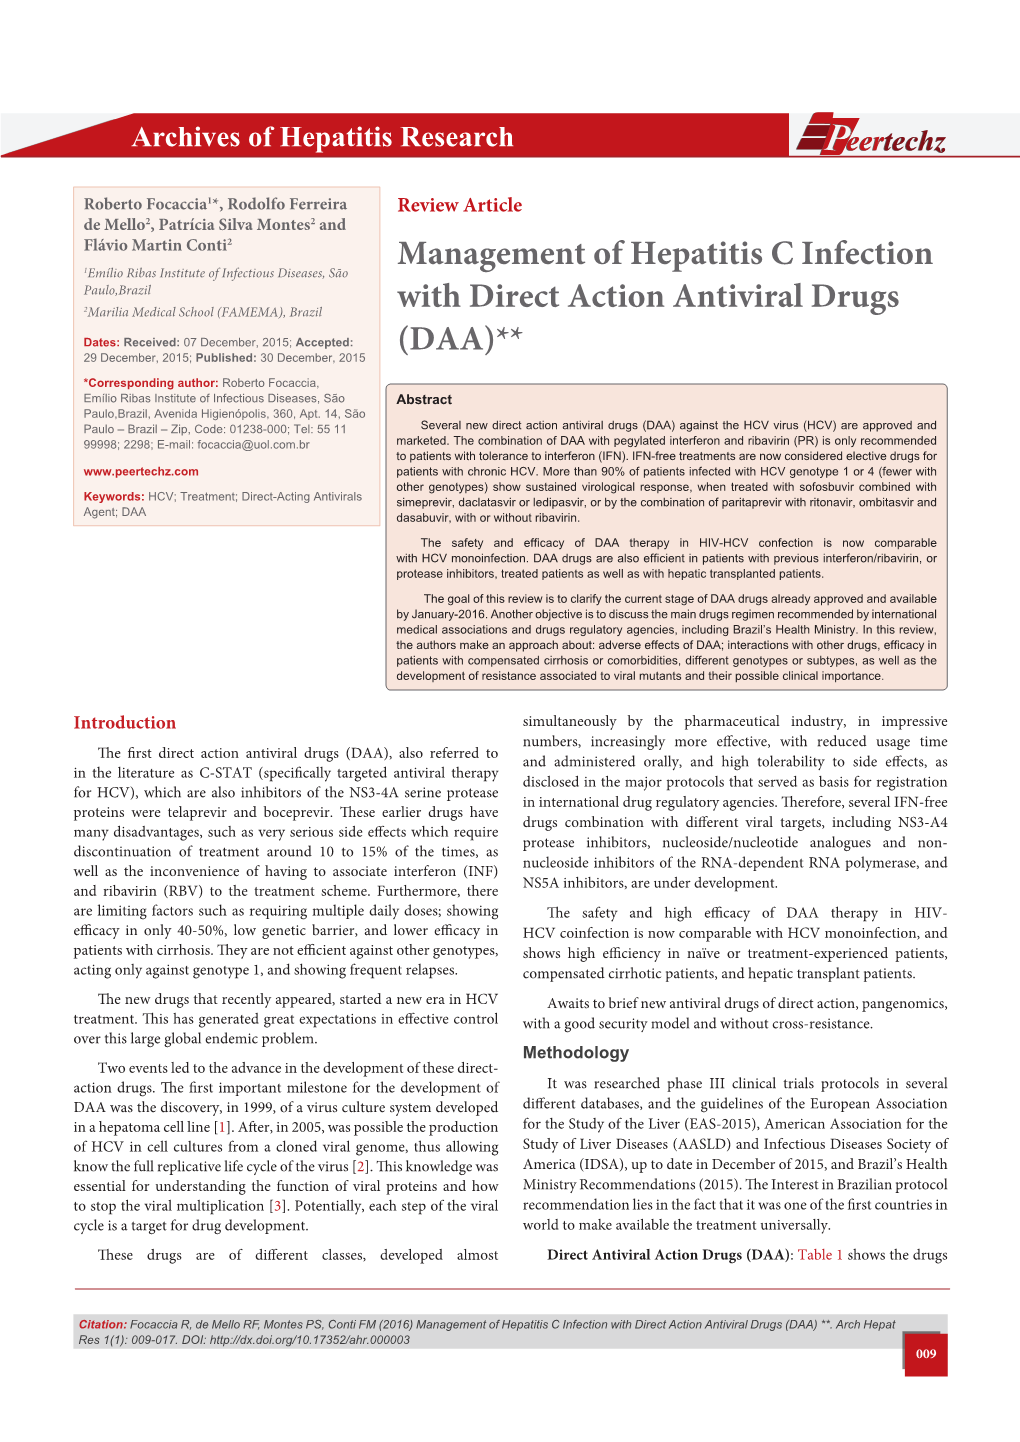 Management of Hepatitis C Infection with Direct Action Antiviral Drugs (DAA) **